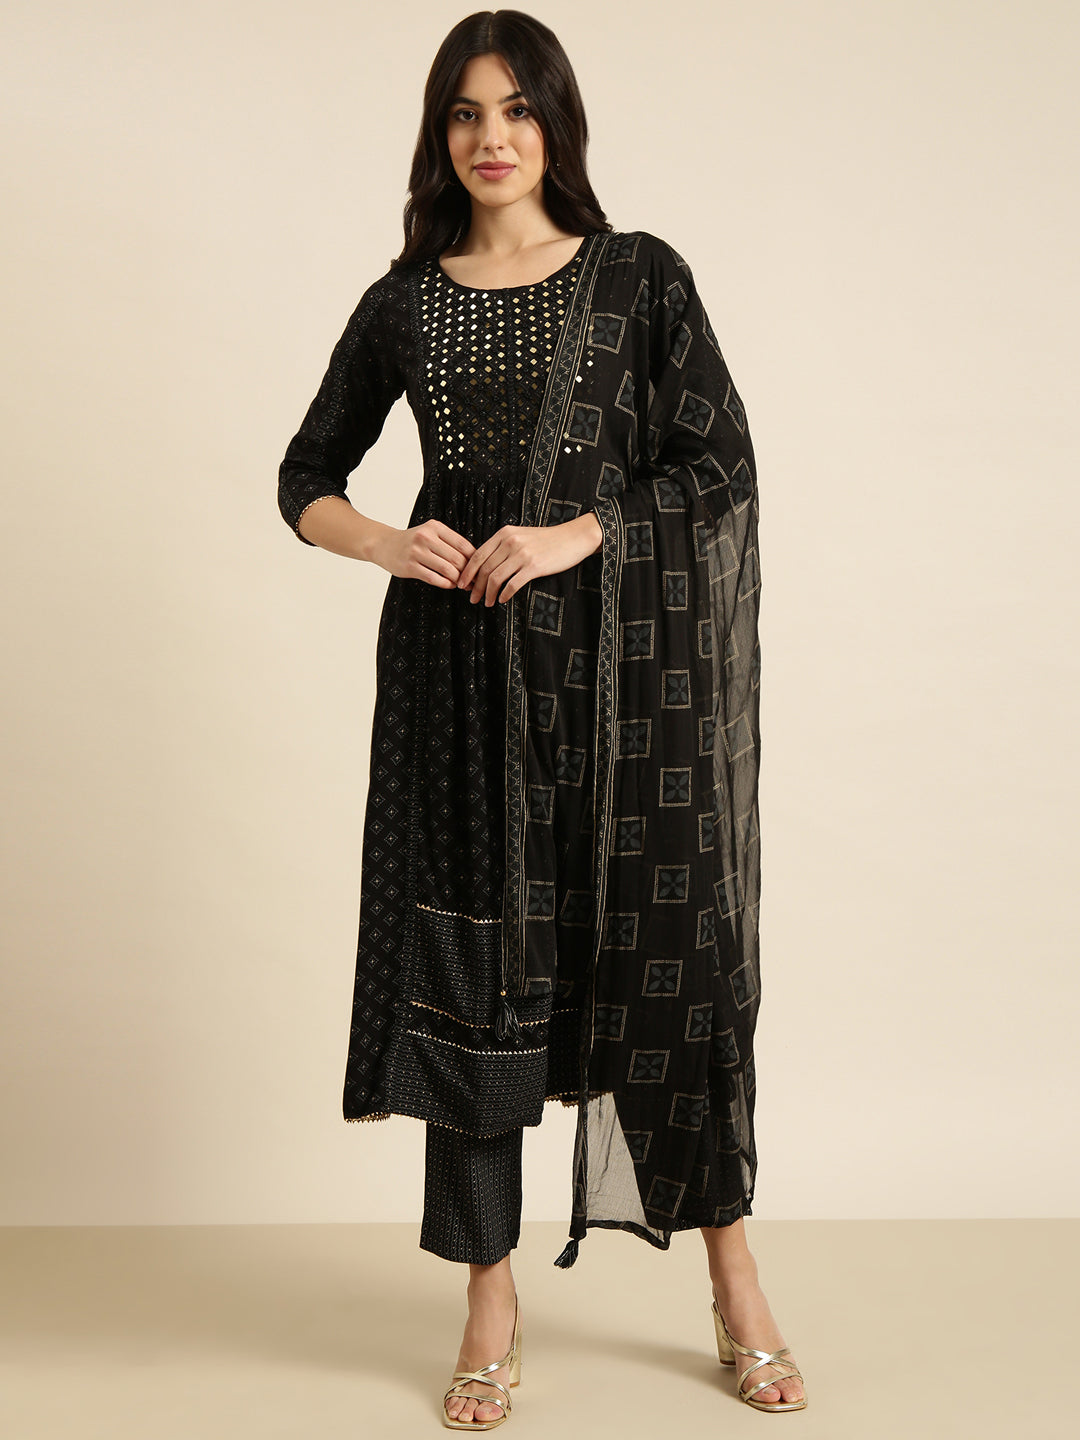 Women A-Line Black Printed Kurta and Trousers Set Comes With Dupatta